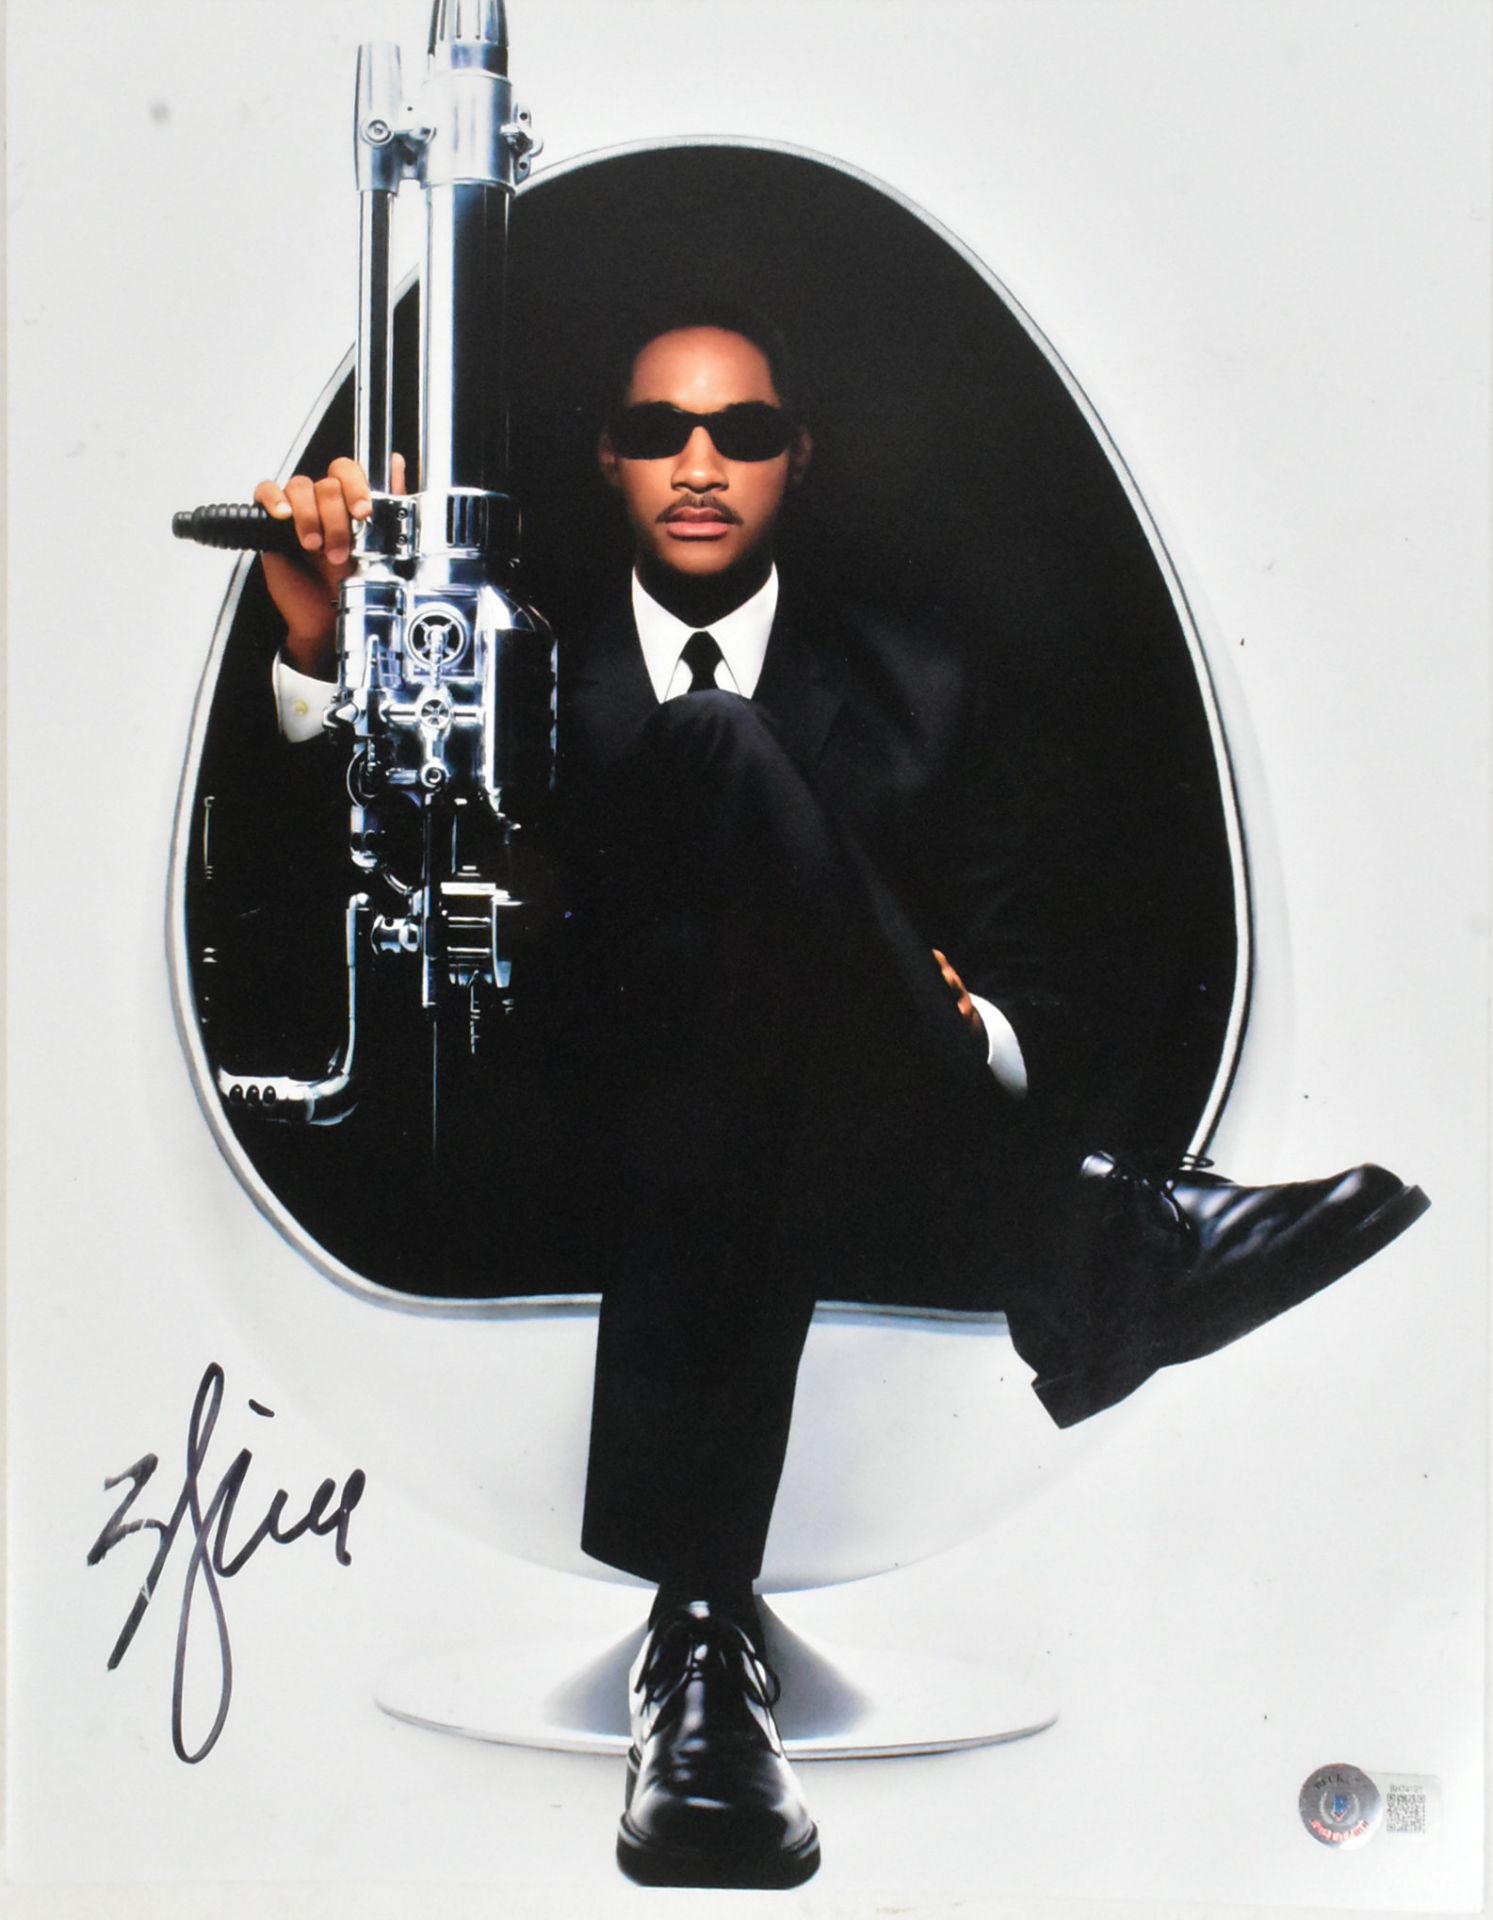 MEN IN BLACK - WILL SMITH - AUTOGRAPHED 11X14" PHOTO - BECKETT